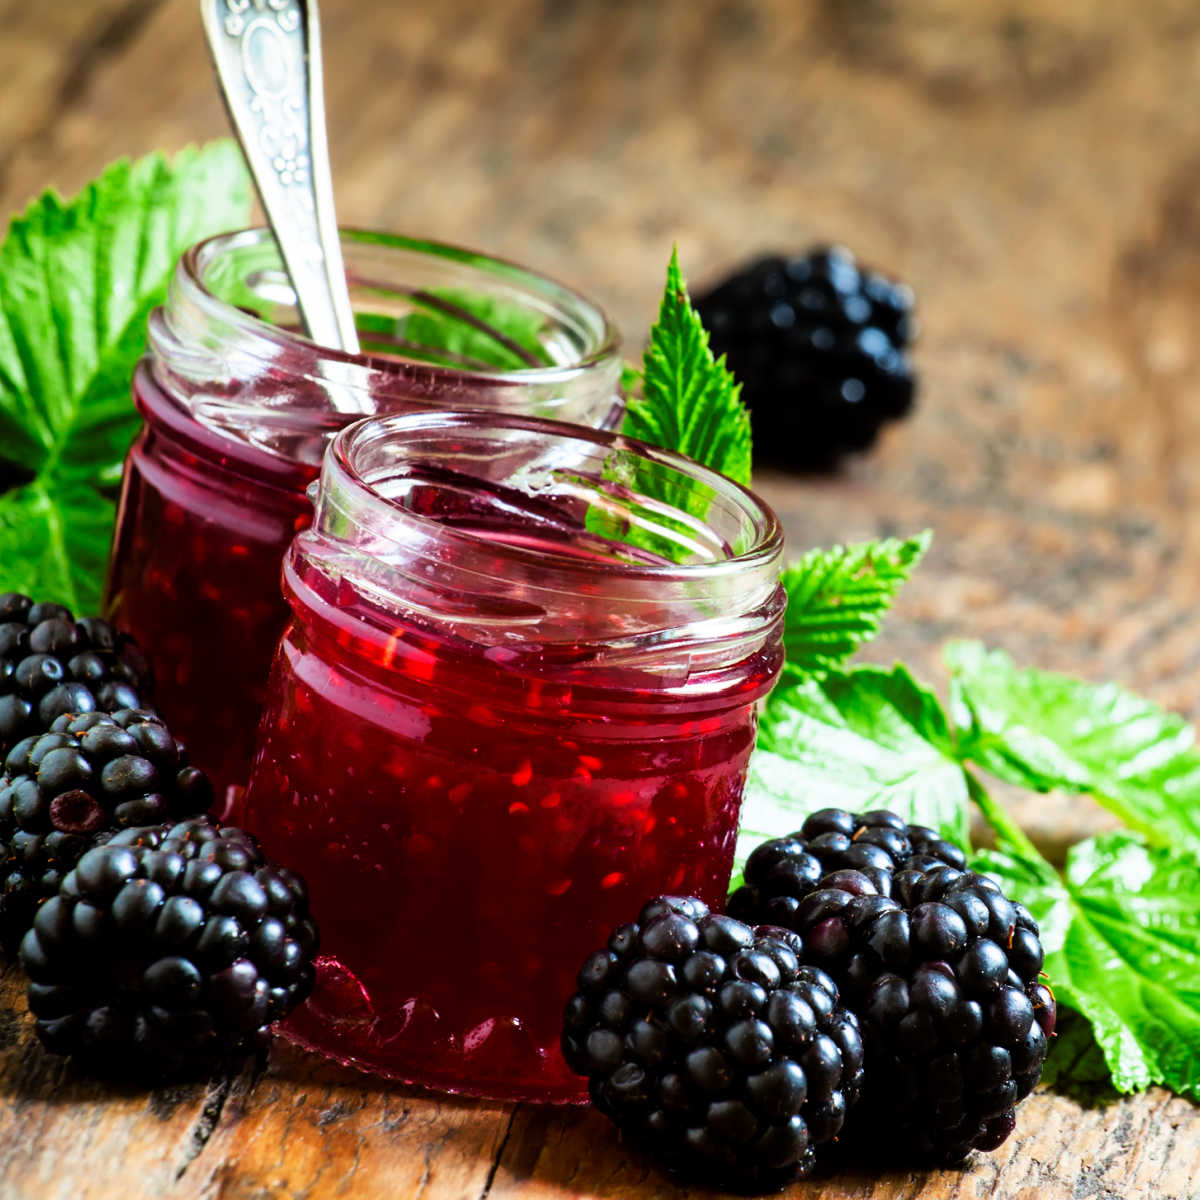 2 jars of blackberry jam surrounded by blackberries on a wood table